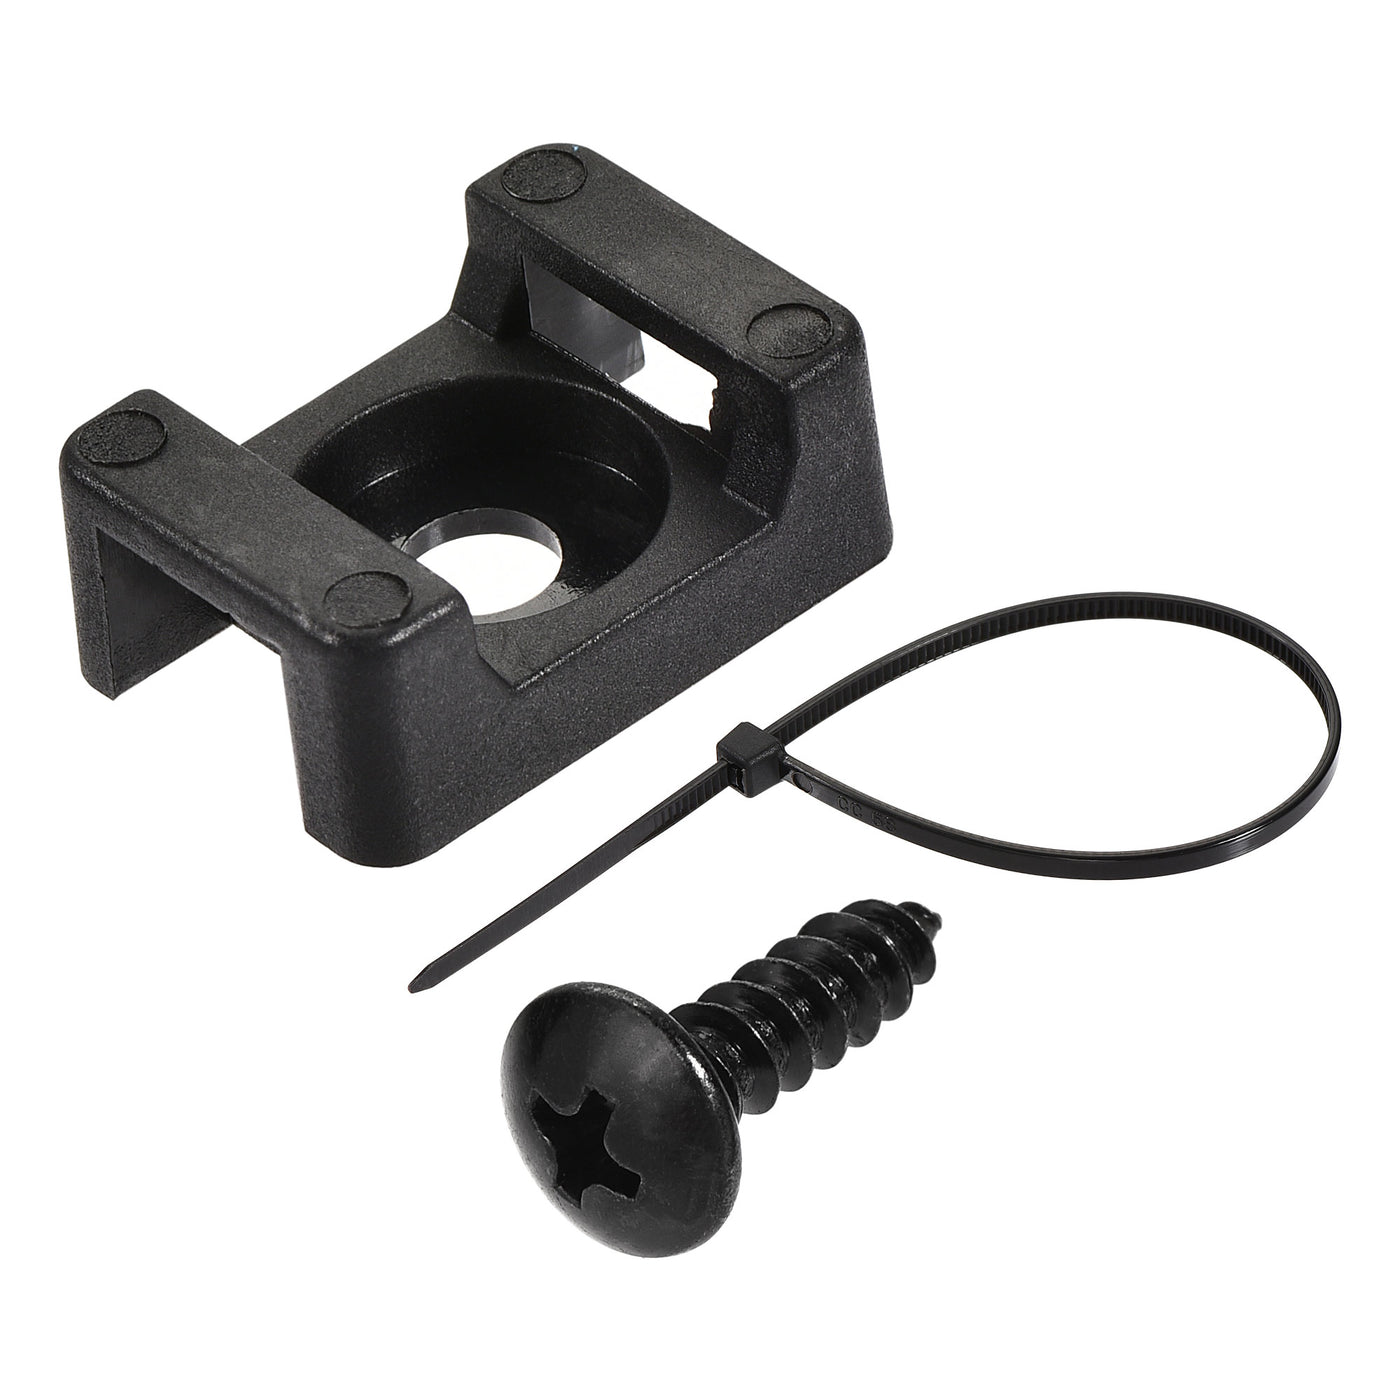 uxcell Uxcell 22.3mmx15.6mmx9.1mm Nylon Cable Fasten Clip with Screws and Ties Black 50 Set